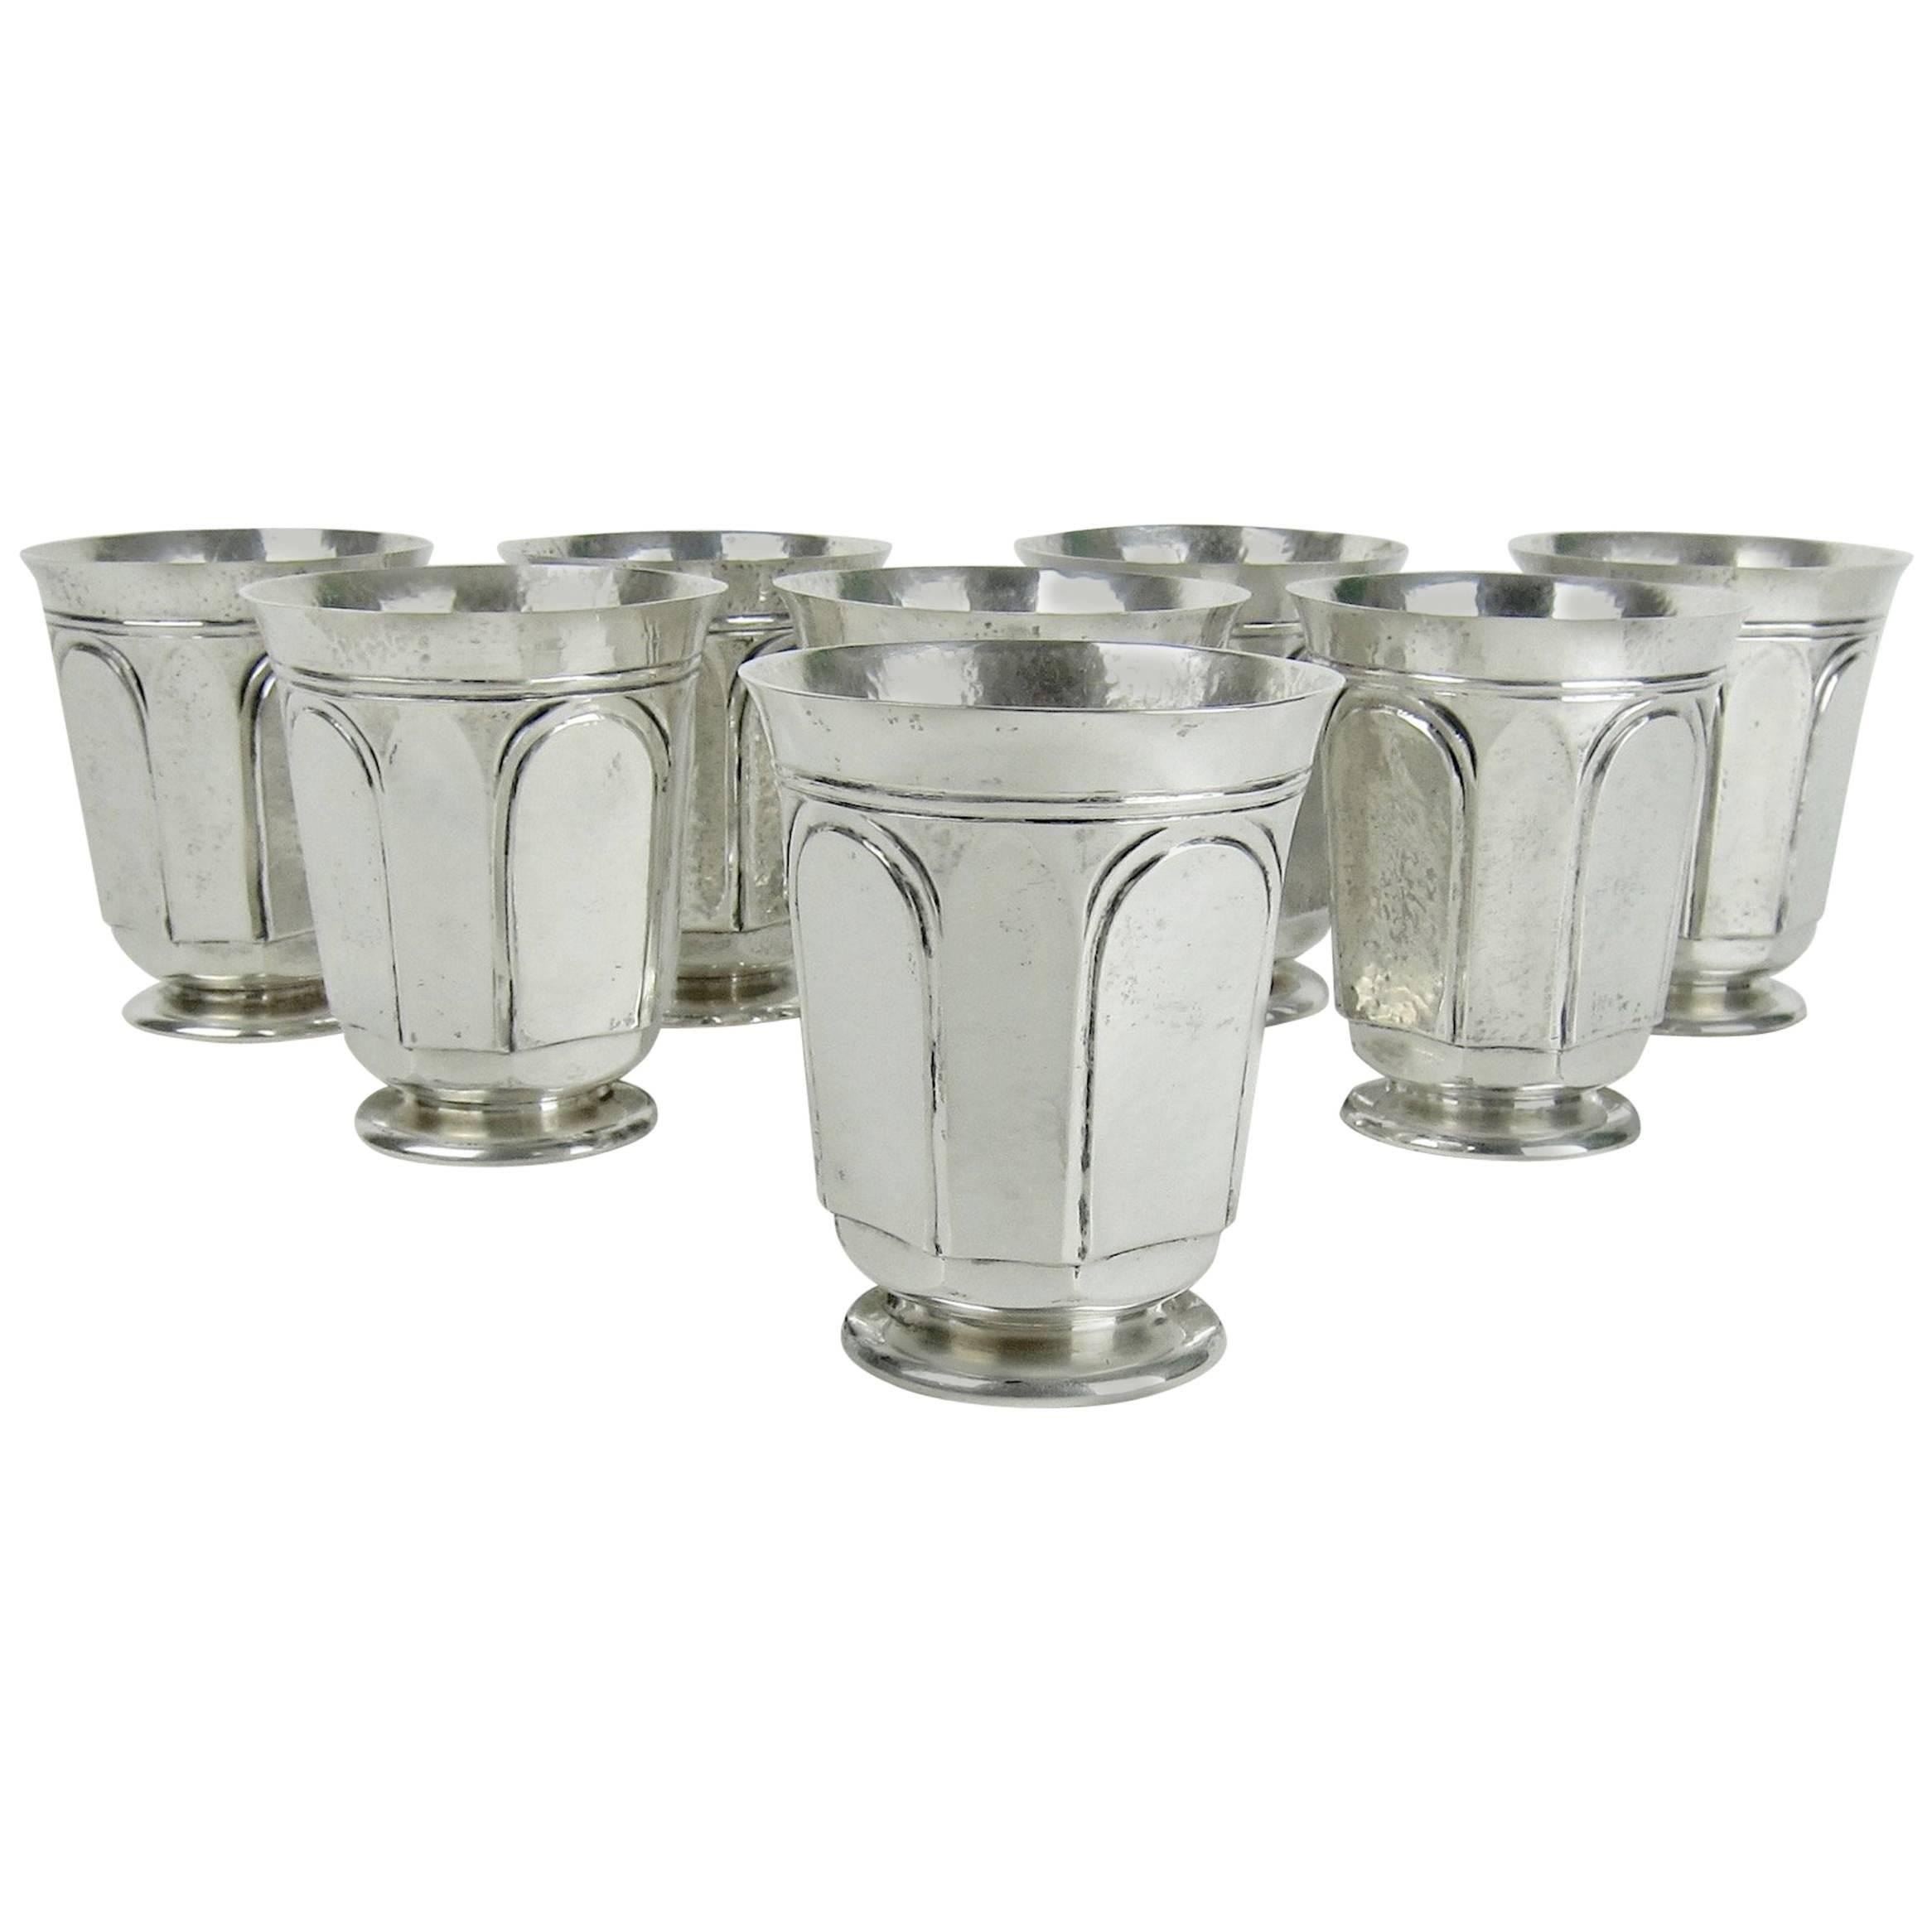 Heavy Sterling Silver Tumblers or Julep Cups by Marie Zimmermann, circa 1915 For Sale